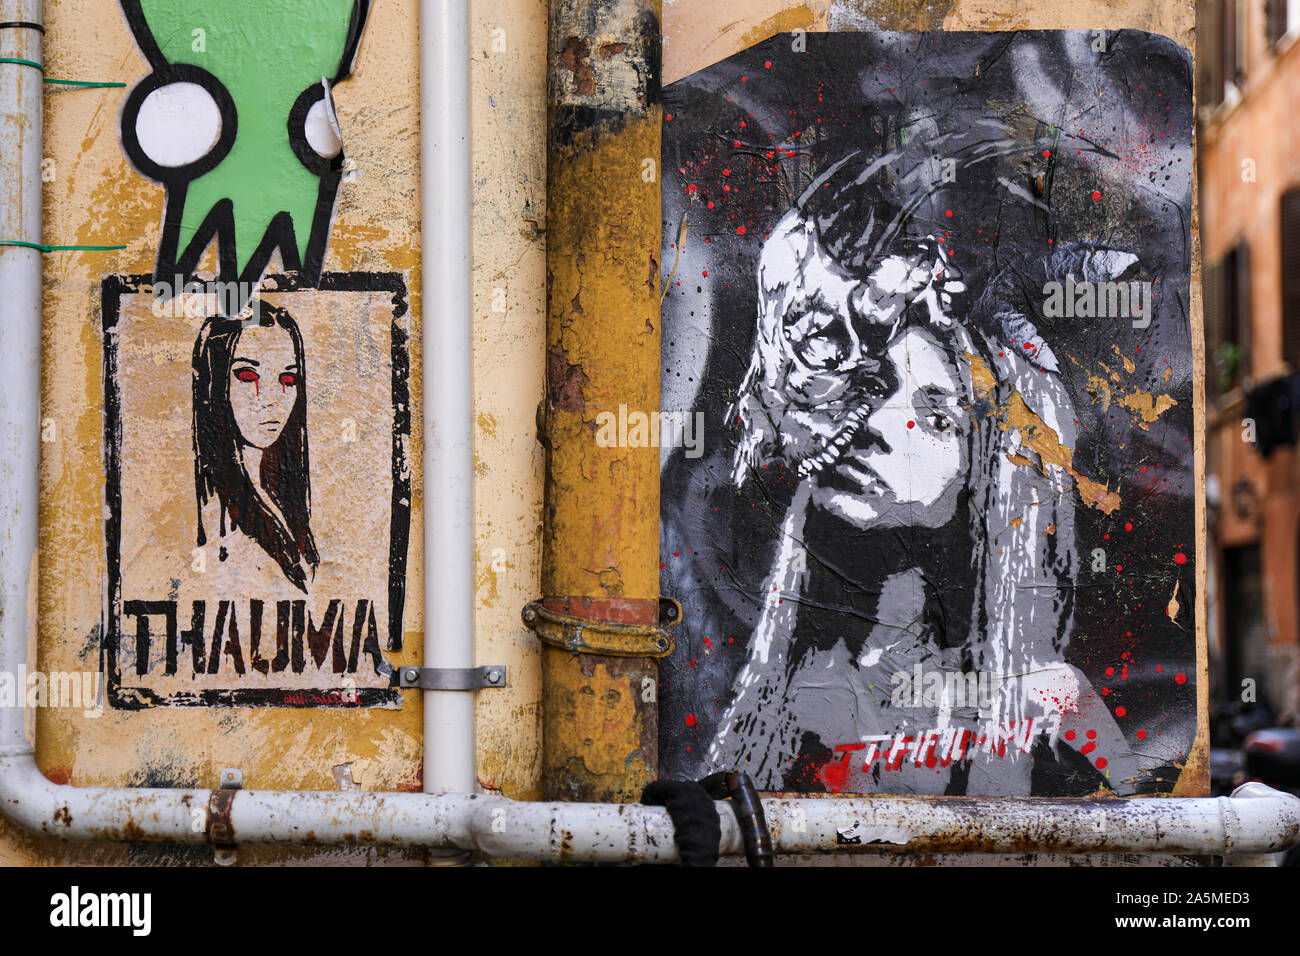 Poster art and other street art in Trastevere ⋆ BLOCAL blog